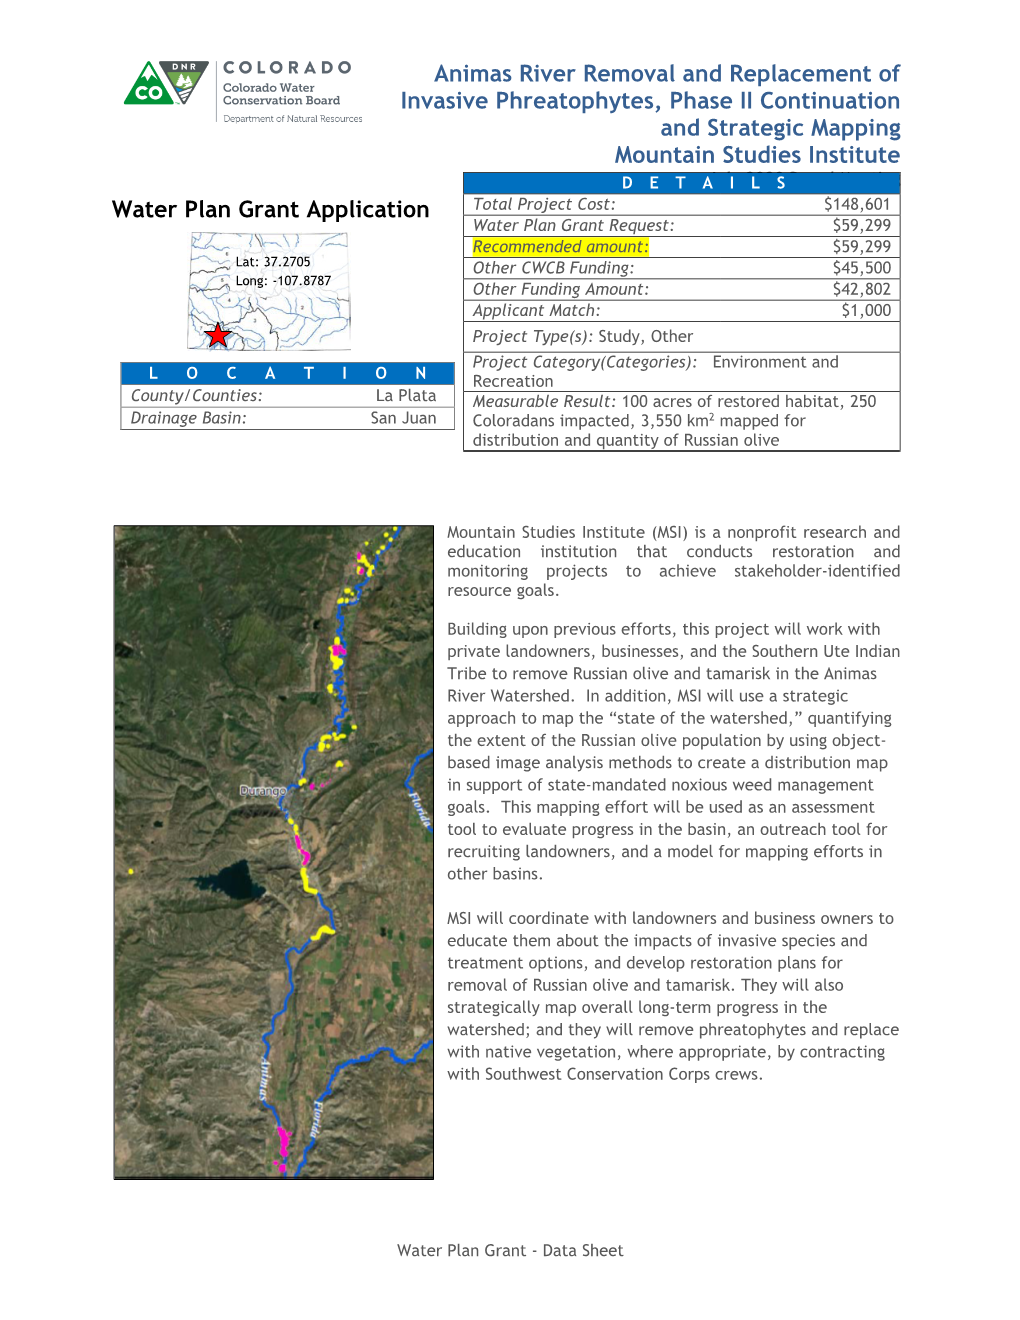 Animas River Removal and Replacement of Invasive